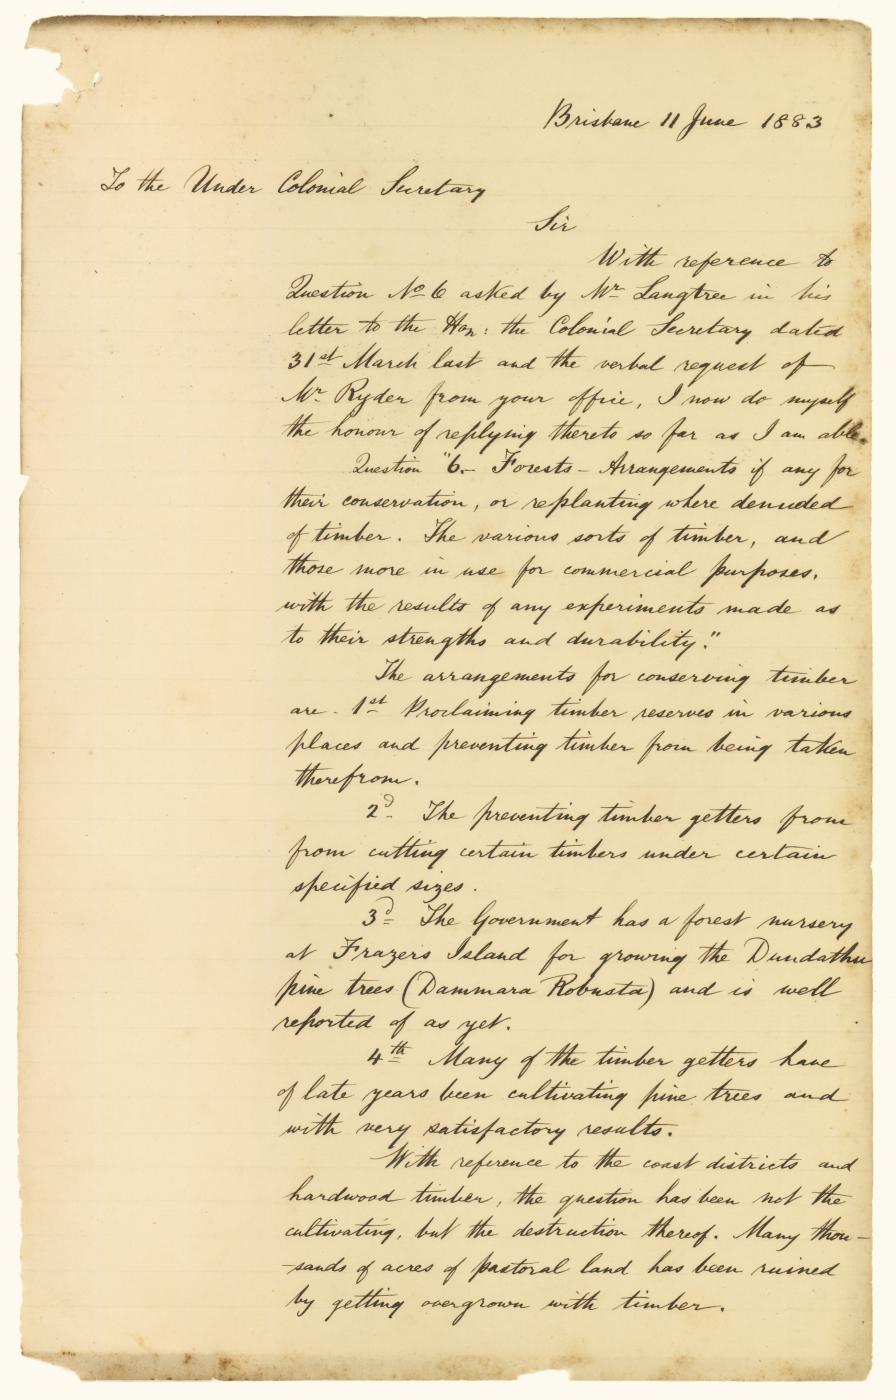 Letter from William Pettigrew regarding timber conservation page 1